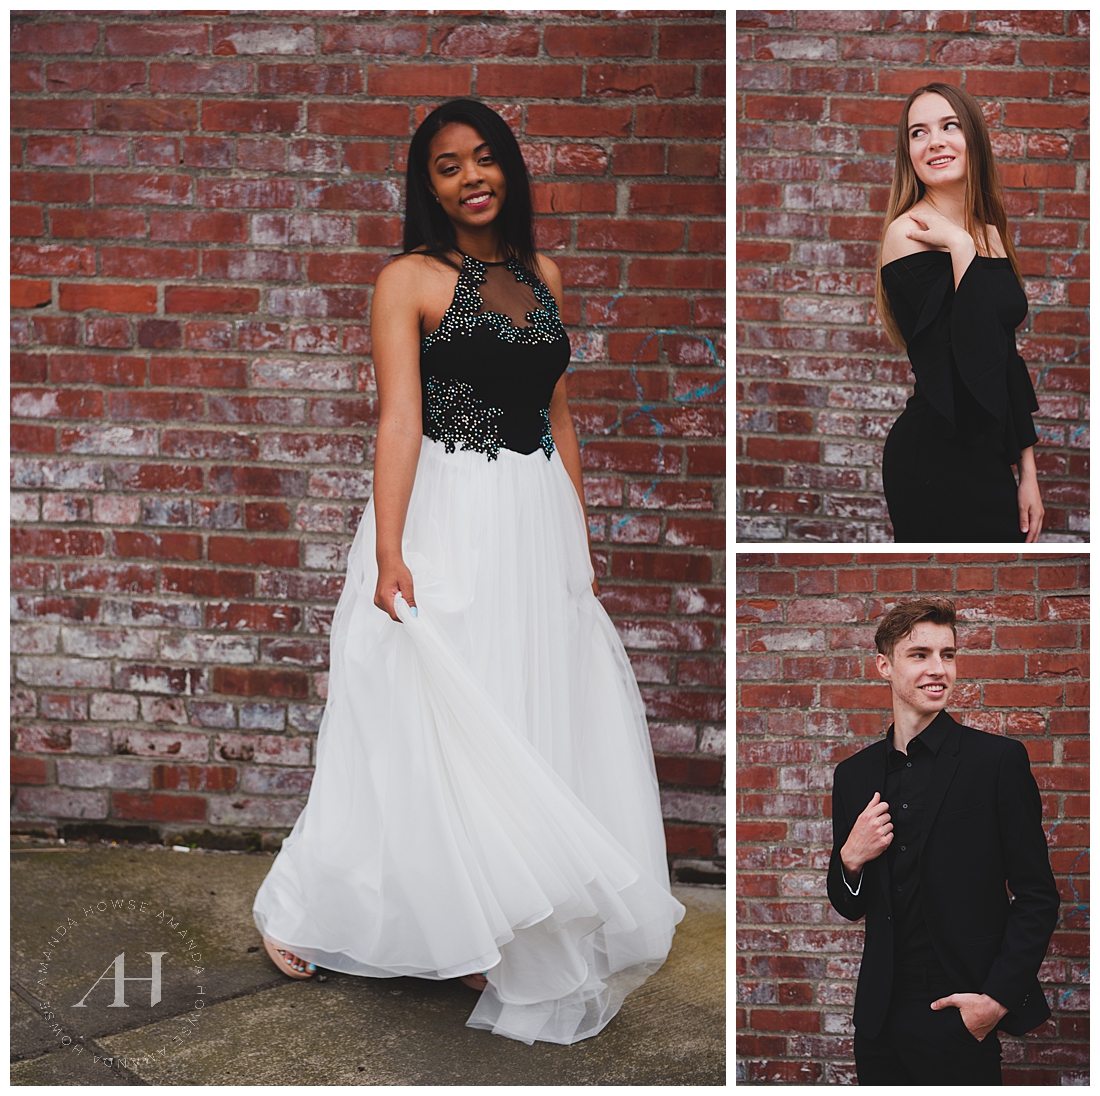 Twirling Prom Portraits | How to Show Off Your Prom Dress, 2021 Prom Mini Sessions, Prom Outfits | Photographed by Amanda Howse Photography